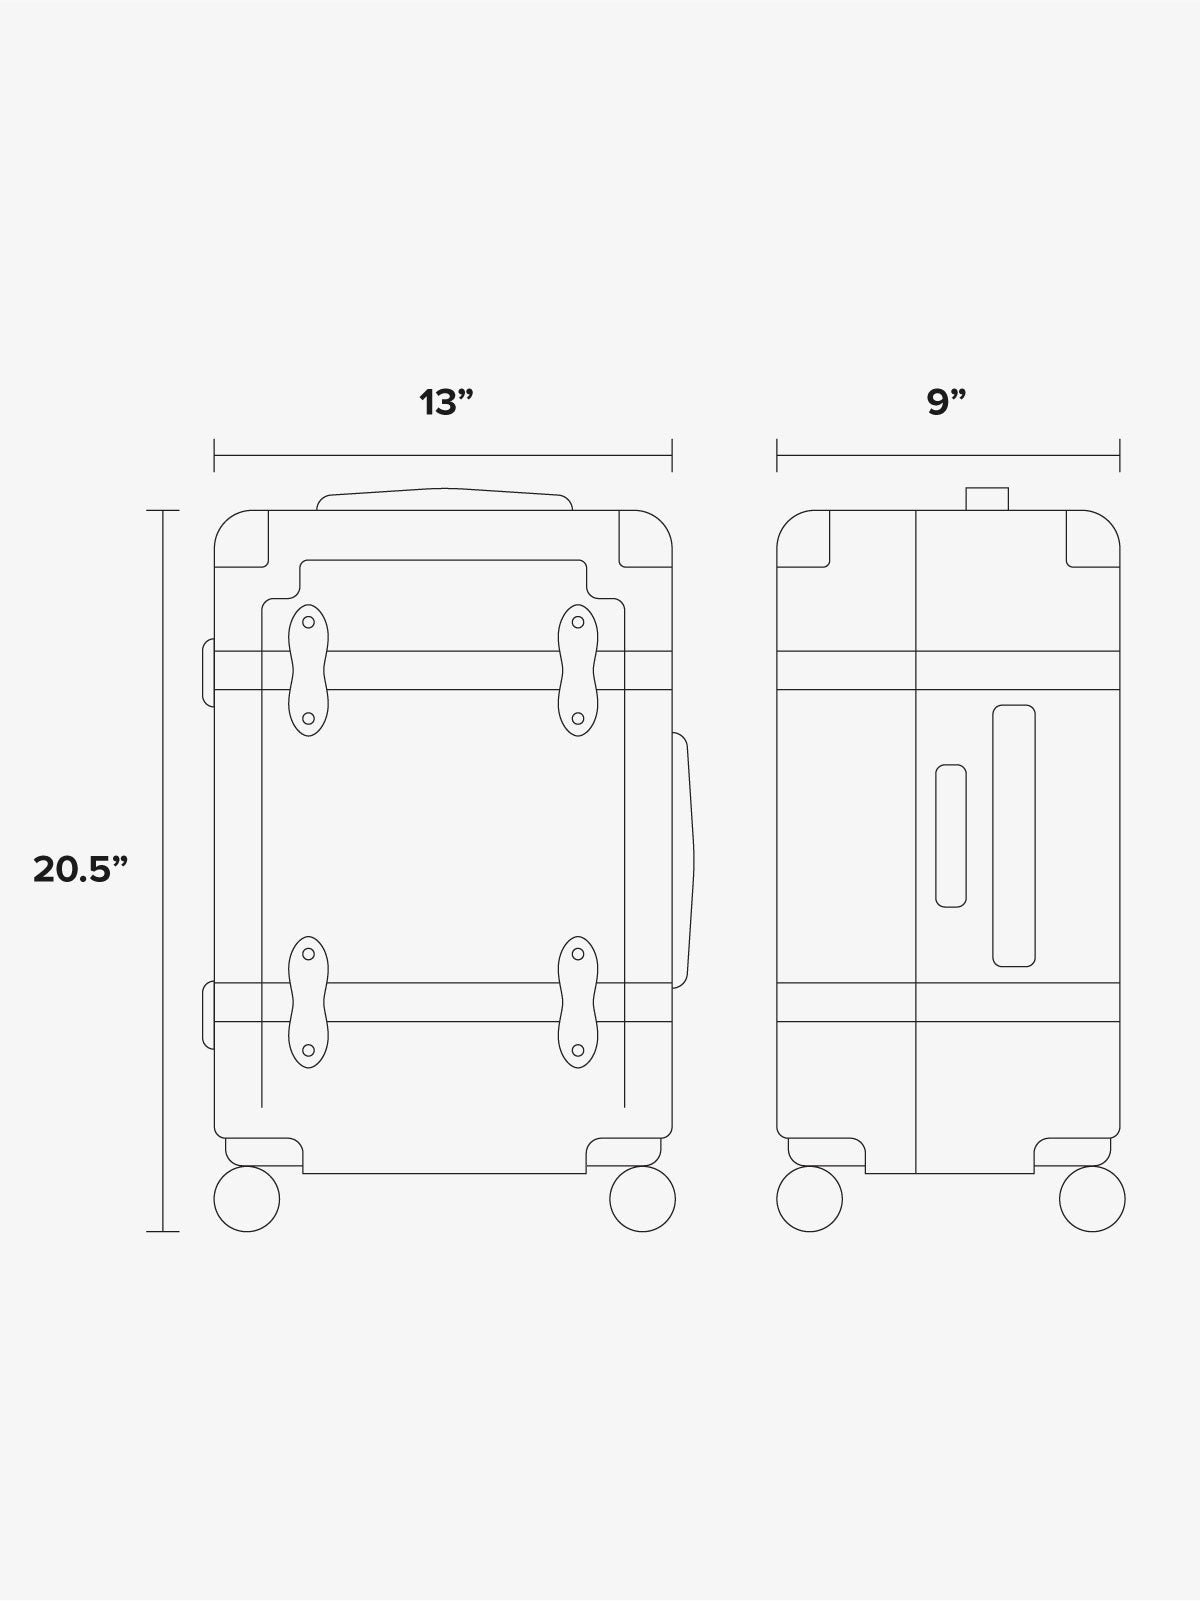 Trnk carry-on luggage dimensions